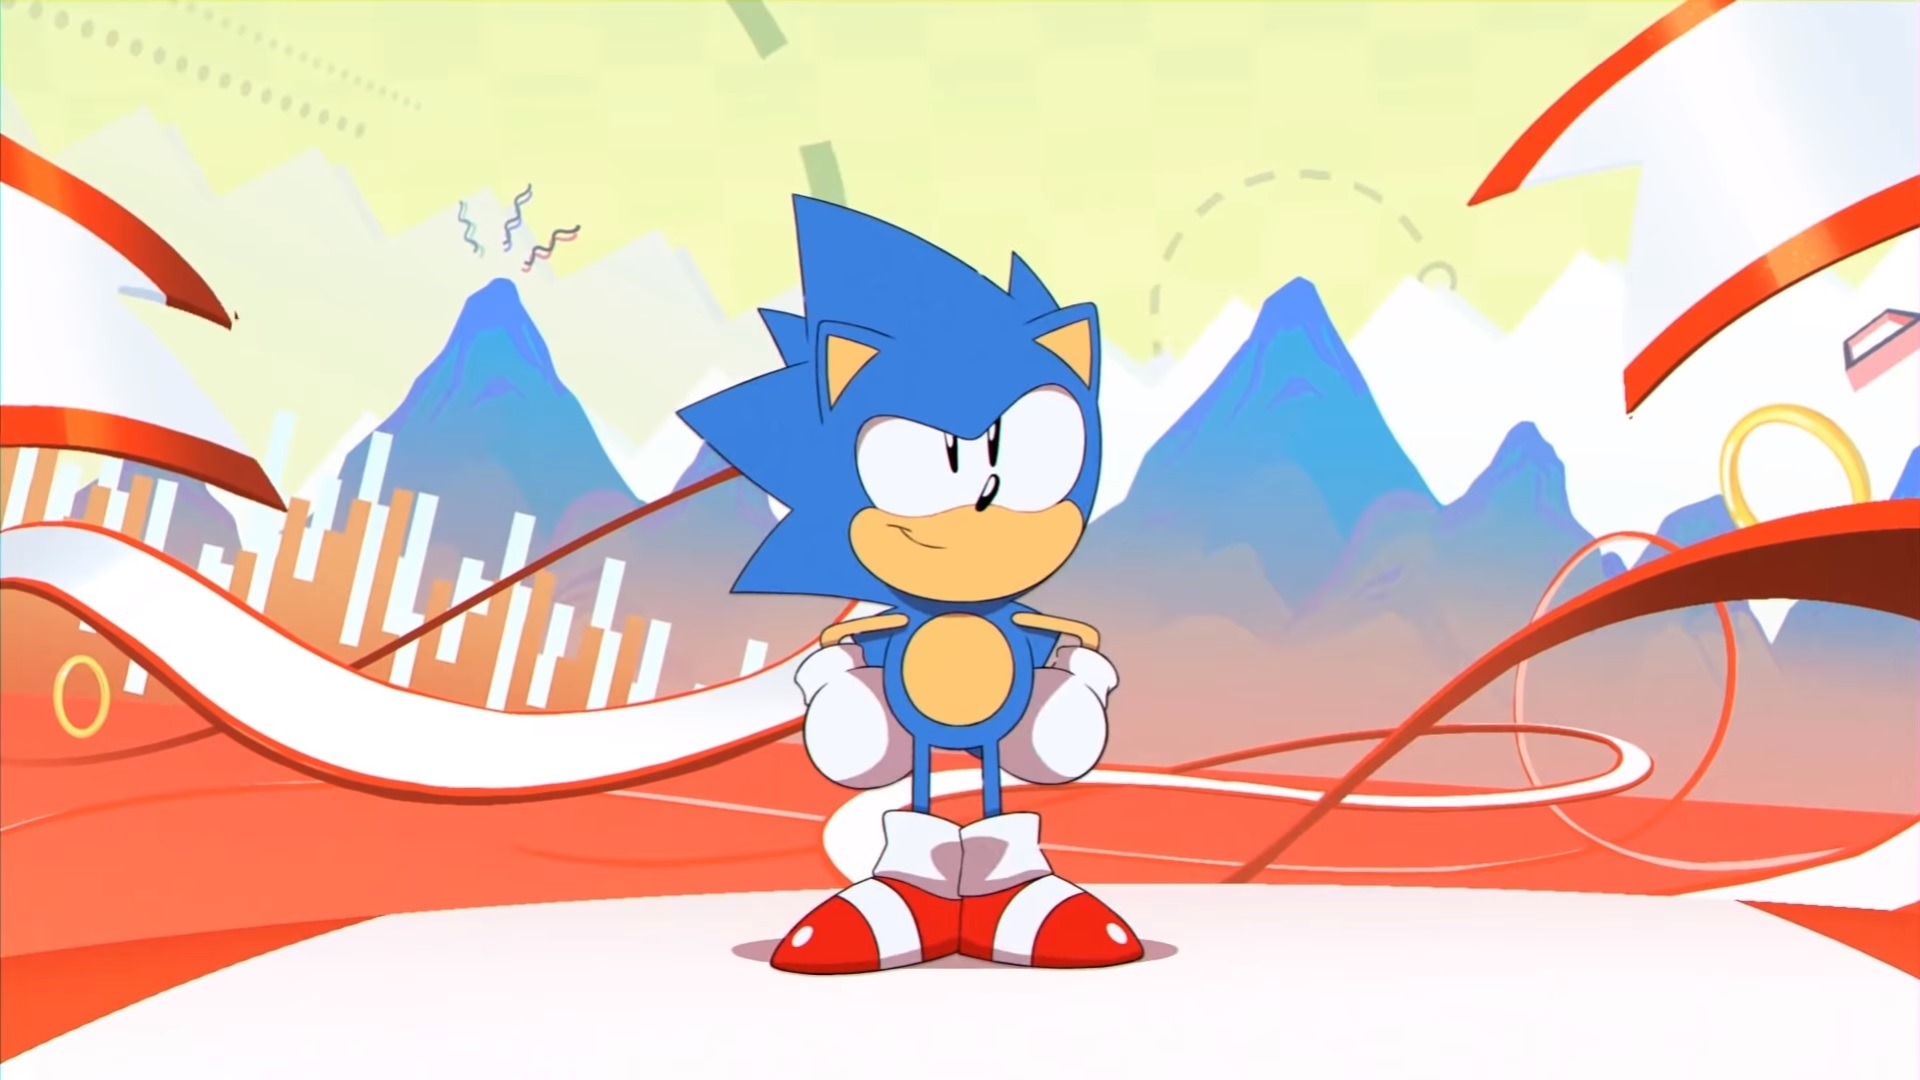 Does anyone else think that Classic Sonic was PEAK character design? I  don't know why but there's something about his cool, cute with attitude  design that I just really love. Modern Sonic